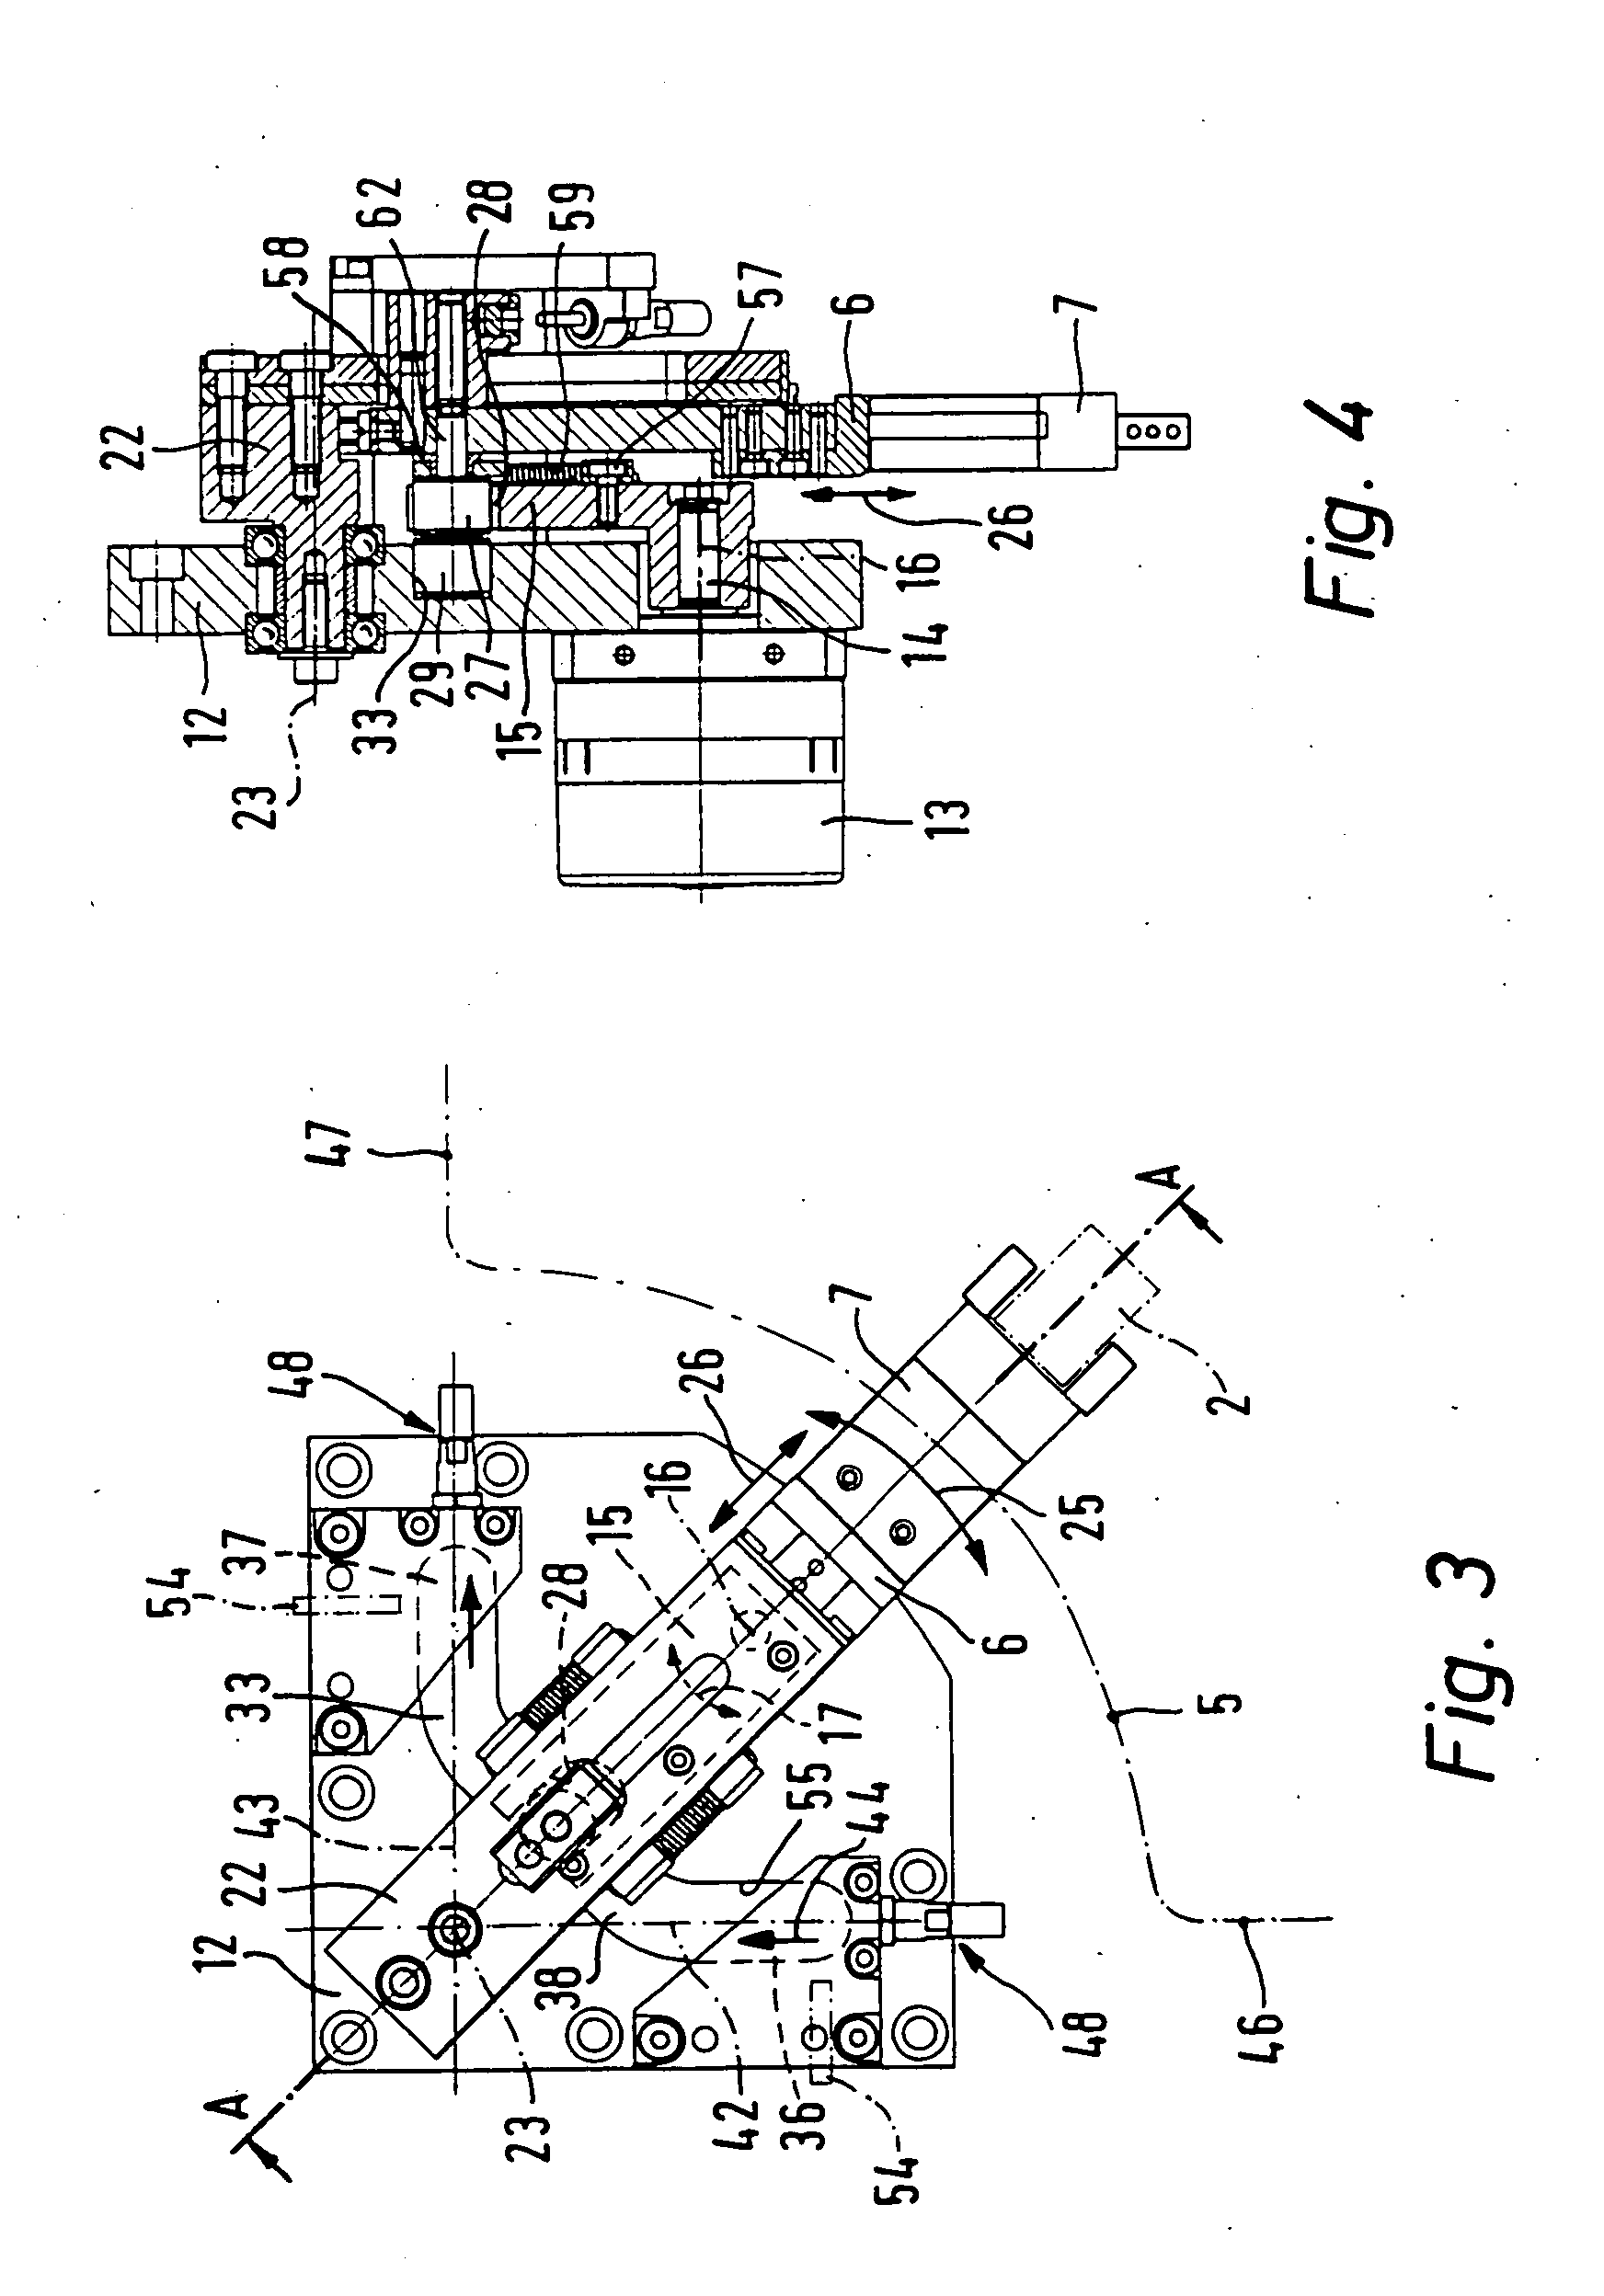 Handling device for repositioning parts